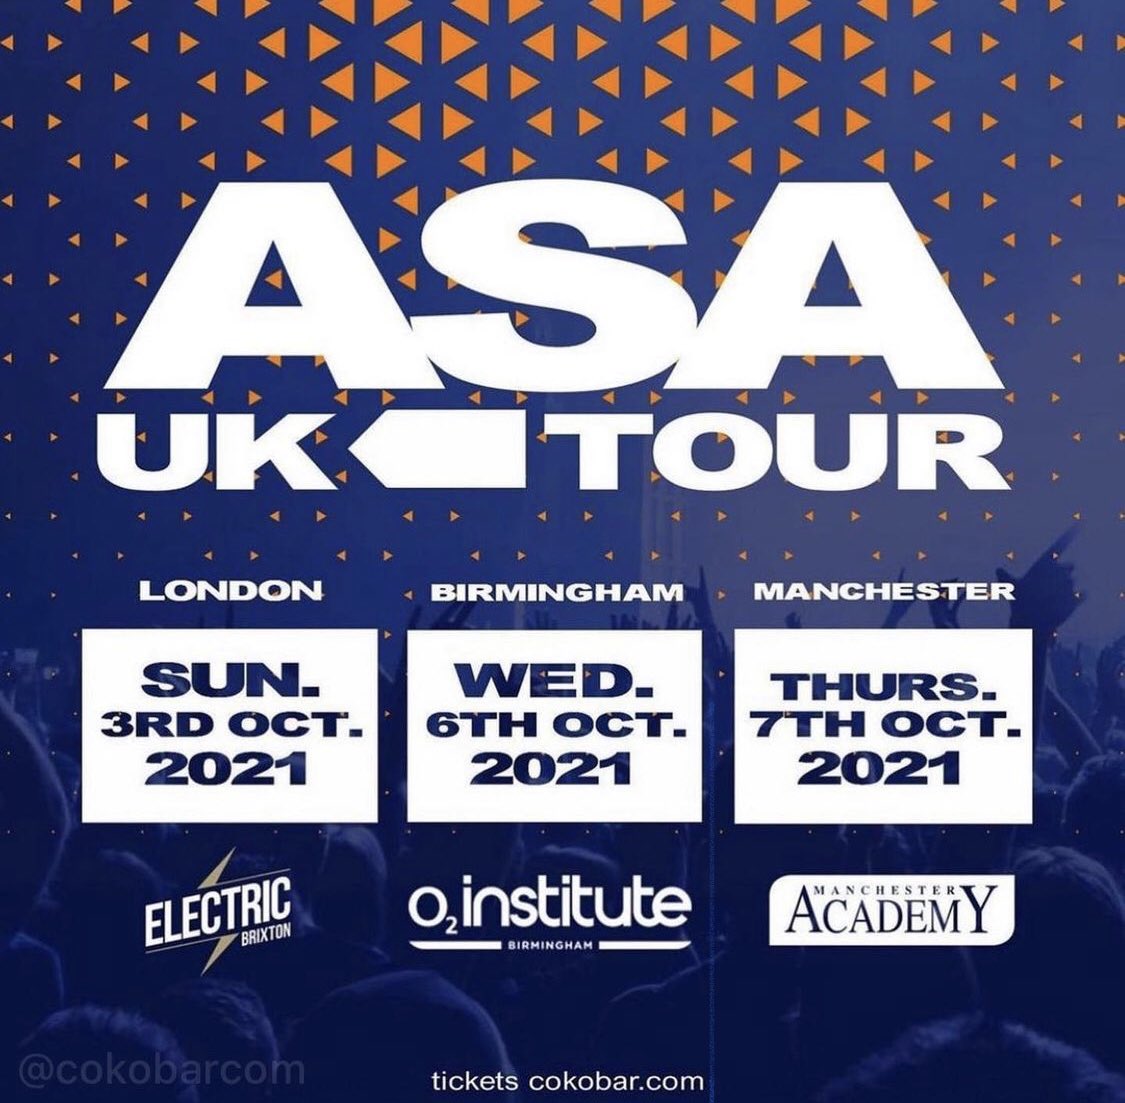 Asa is coming to UK October 3rd, 6th and 7th at the #ElectricBrixton #o2institutebirmingham #manchesteracademy ⚡️

Tickets available cokobar.com 

Chelsea yourself